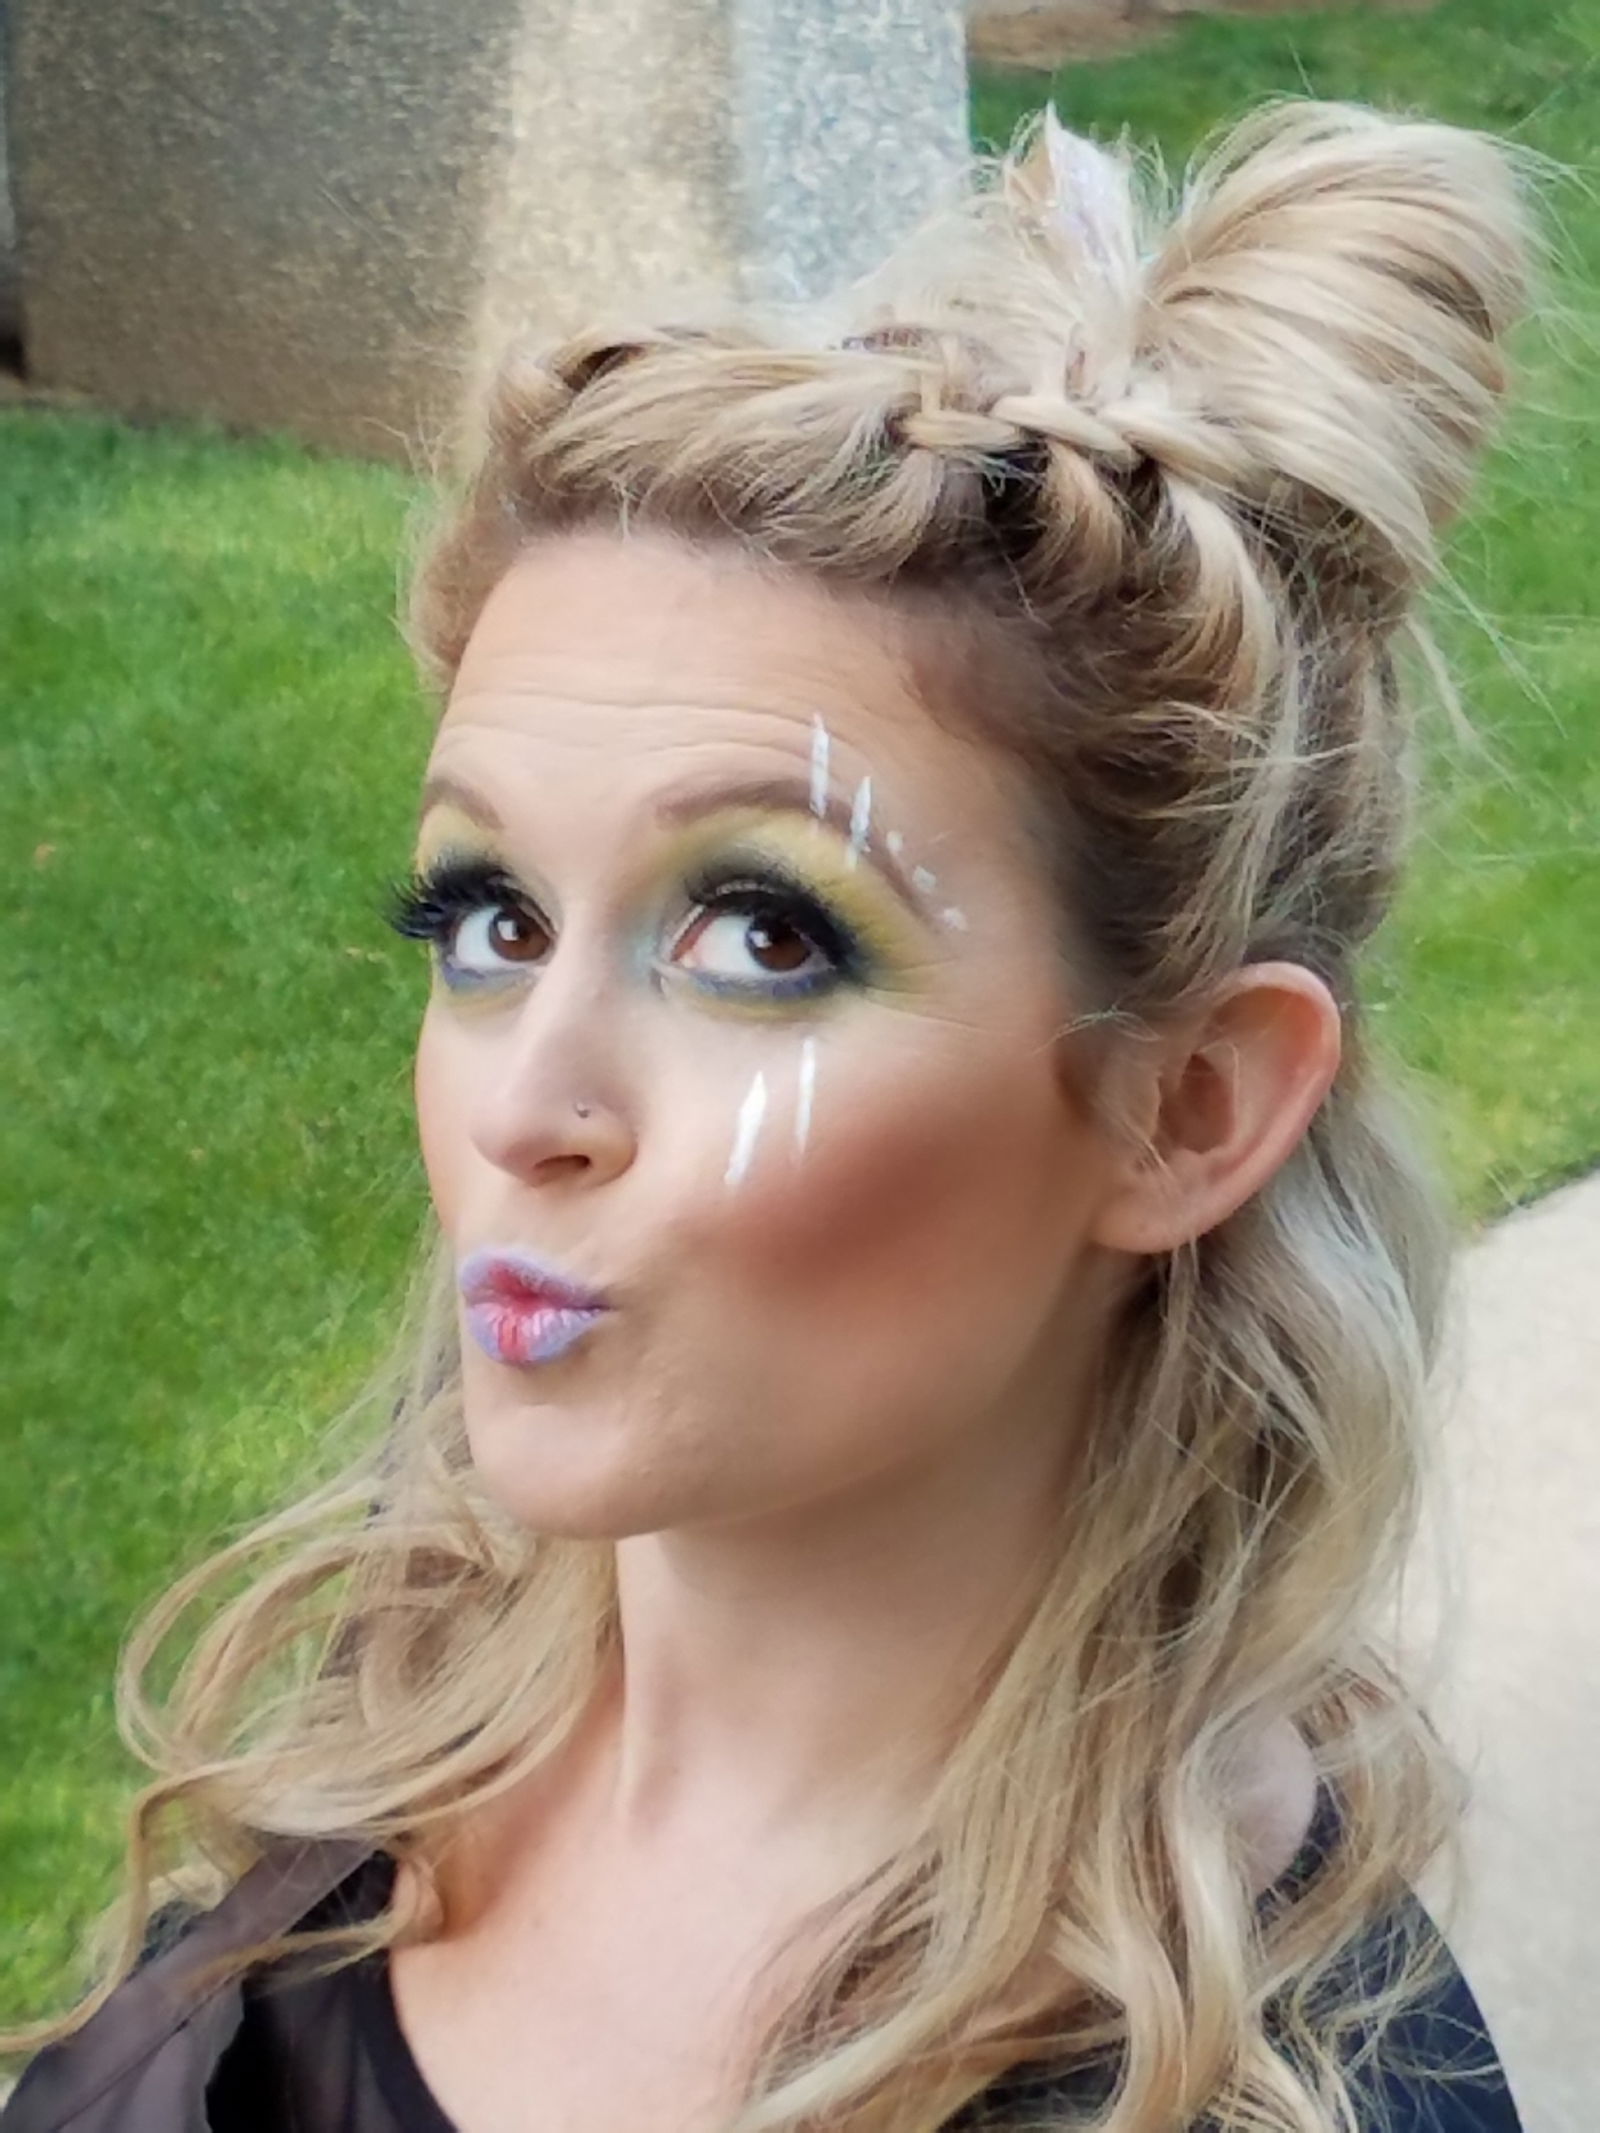 Cute festival up-do and fun makeup - complete with duck face!